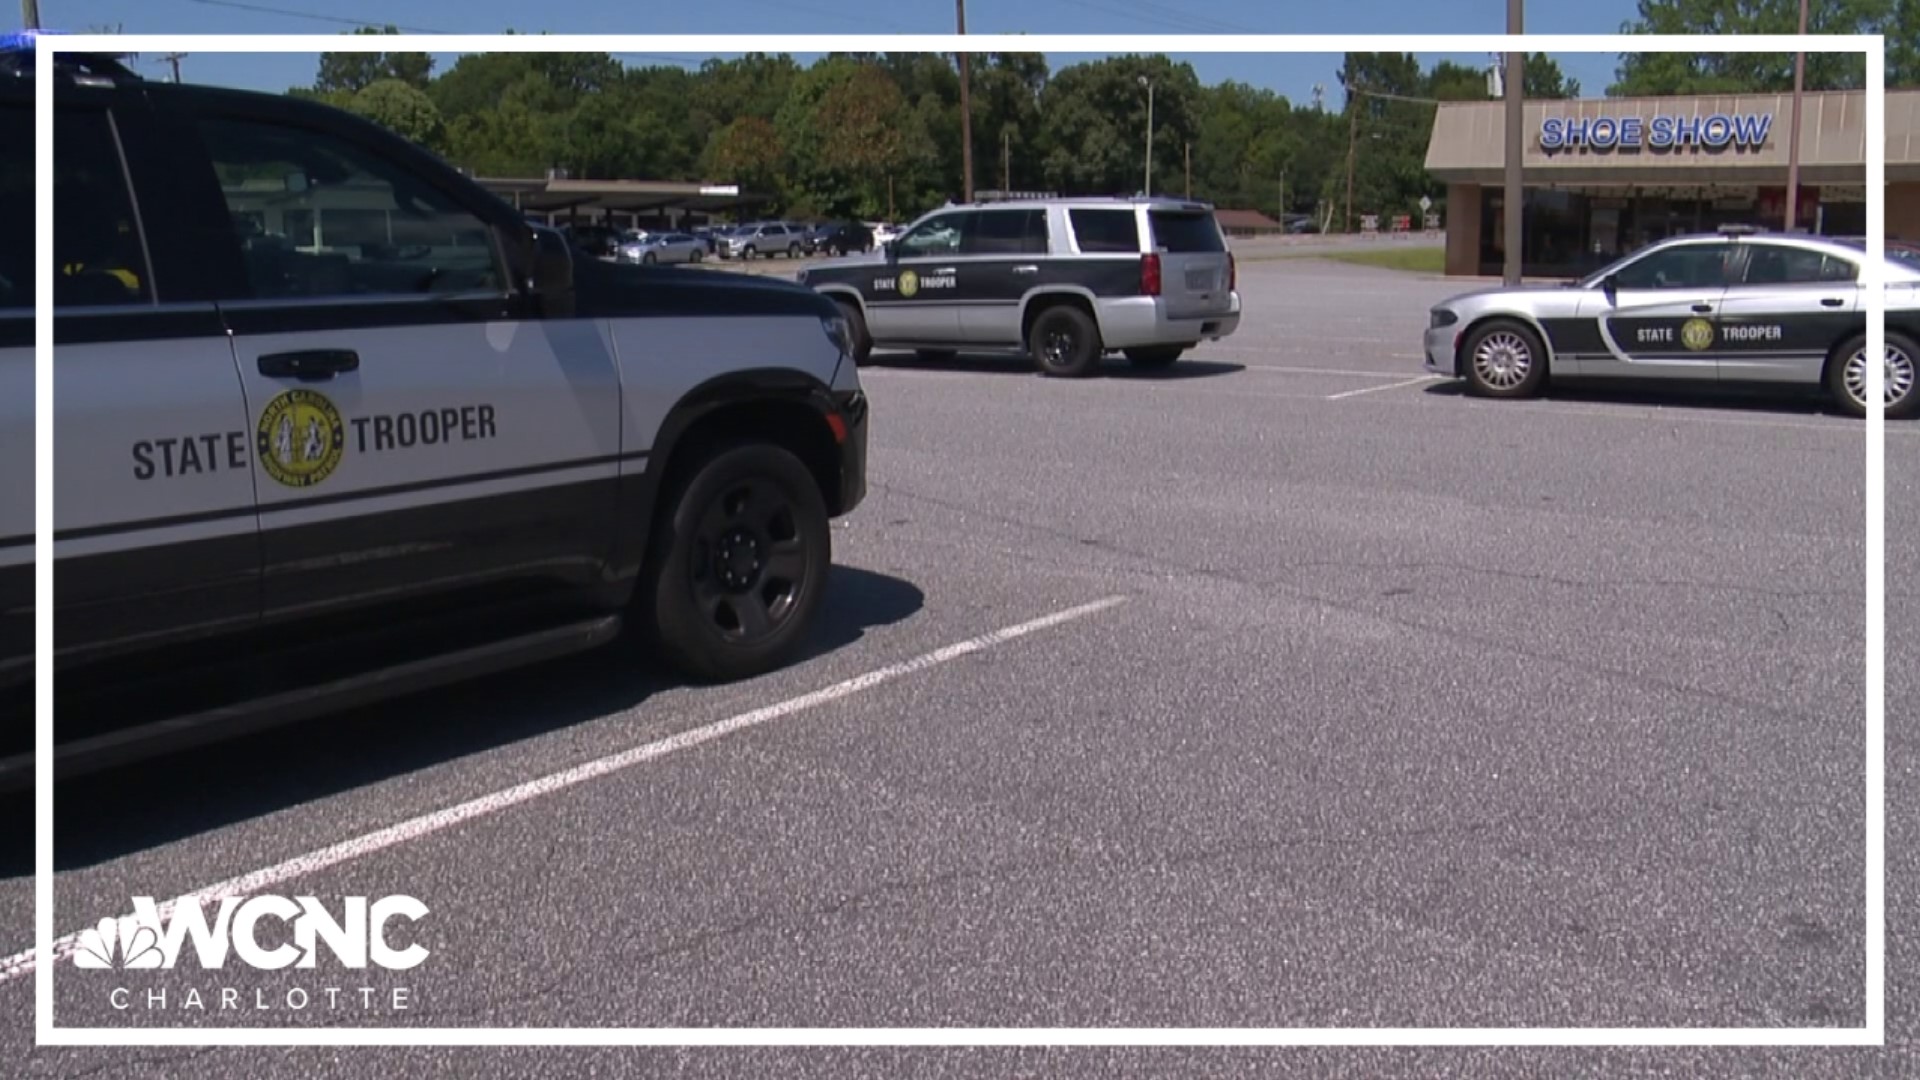 A Friday evening police chase in Hickory that killed a mother and her son has renewed questions about when police officers should and should not chase vehicles.